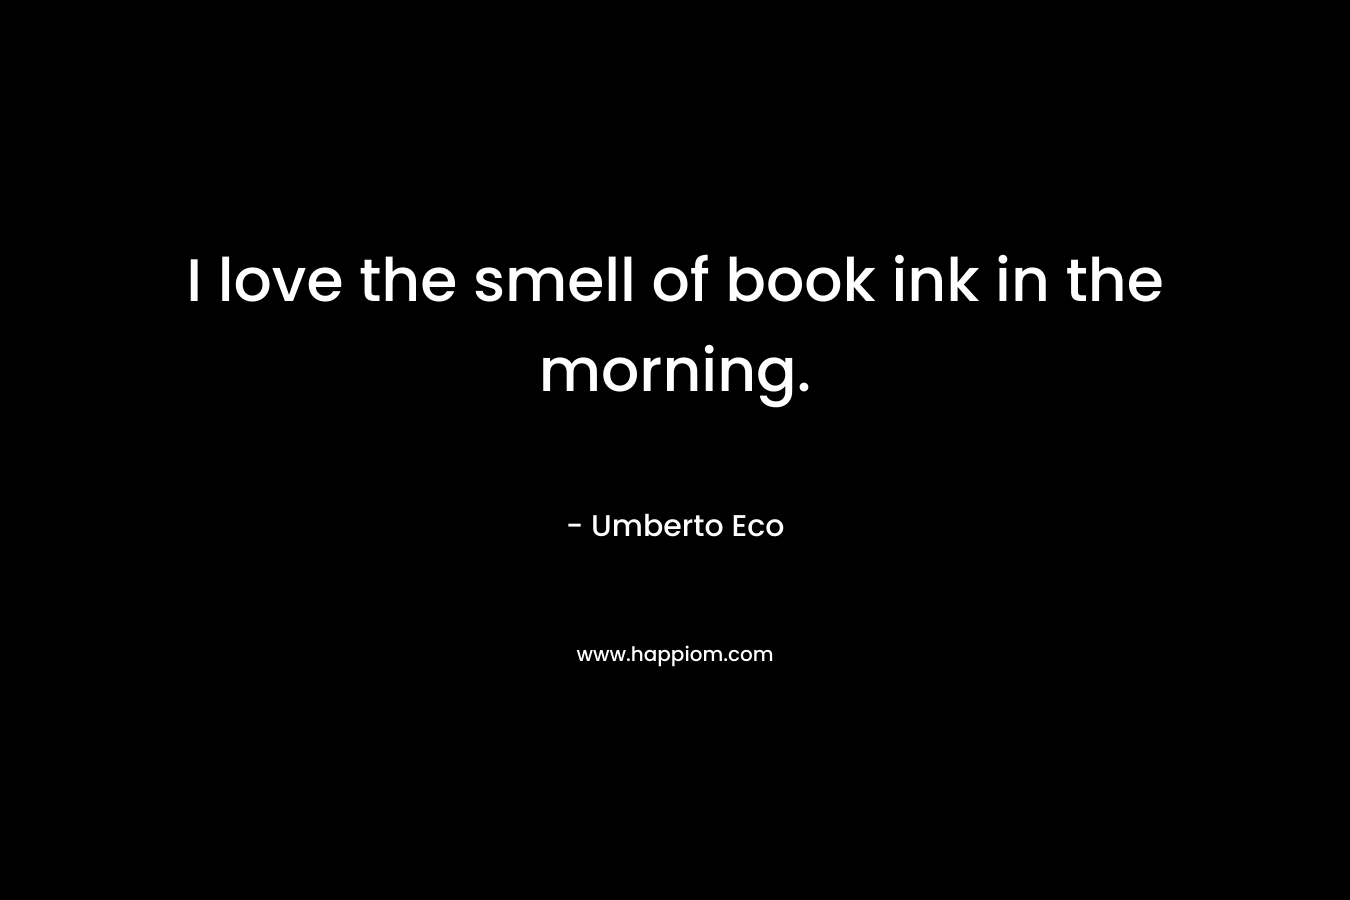 I love the smell of book ink in the morning.